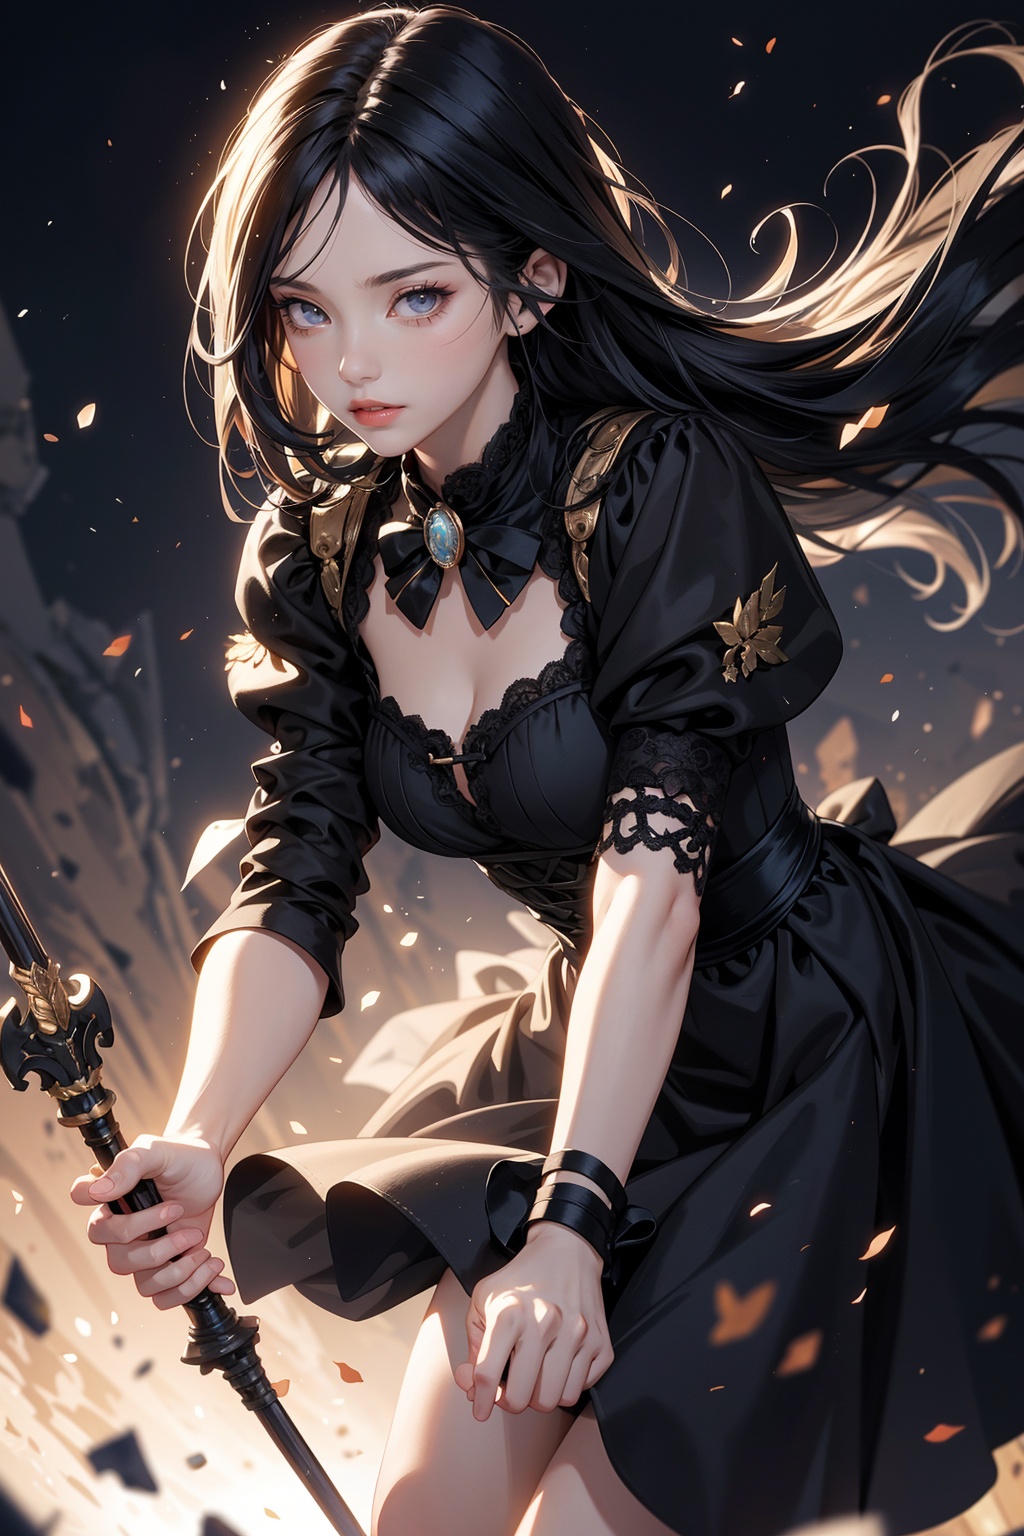 (Masterpiece,Best Quality), A realistic anime girl in a maid dress with coal-colored hair, striking a battle pose with a spear, inviting viewers to look closely at the high-resolution illustration, Fantasy, magical vibes, sci-fi mood, sparks, DoF, bokeh, sharp focus